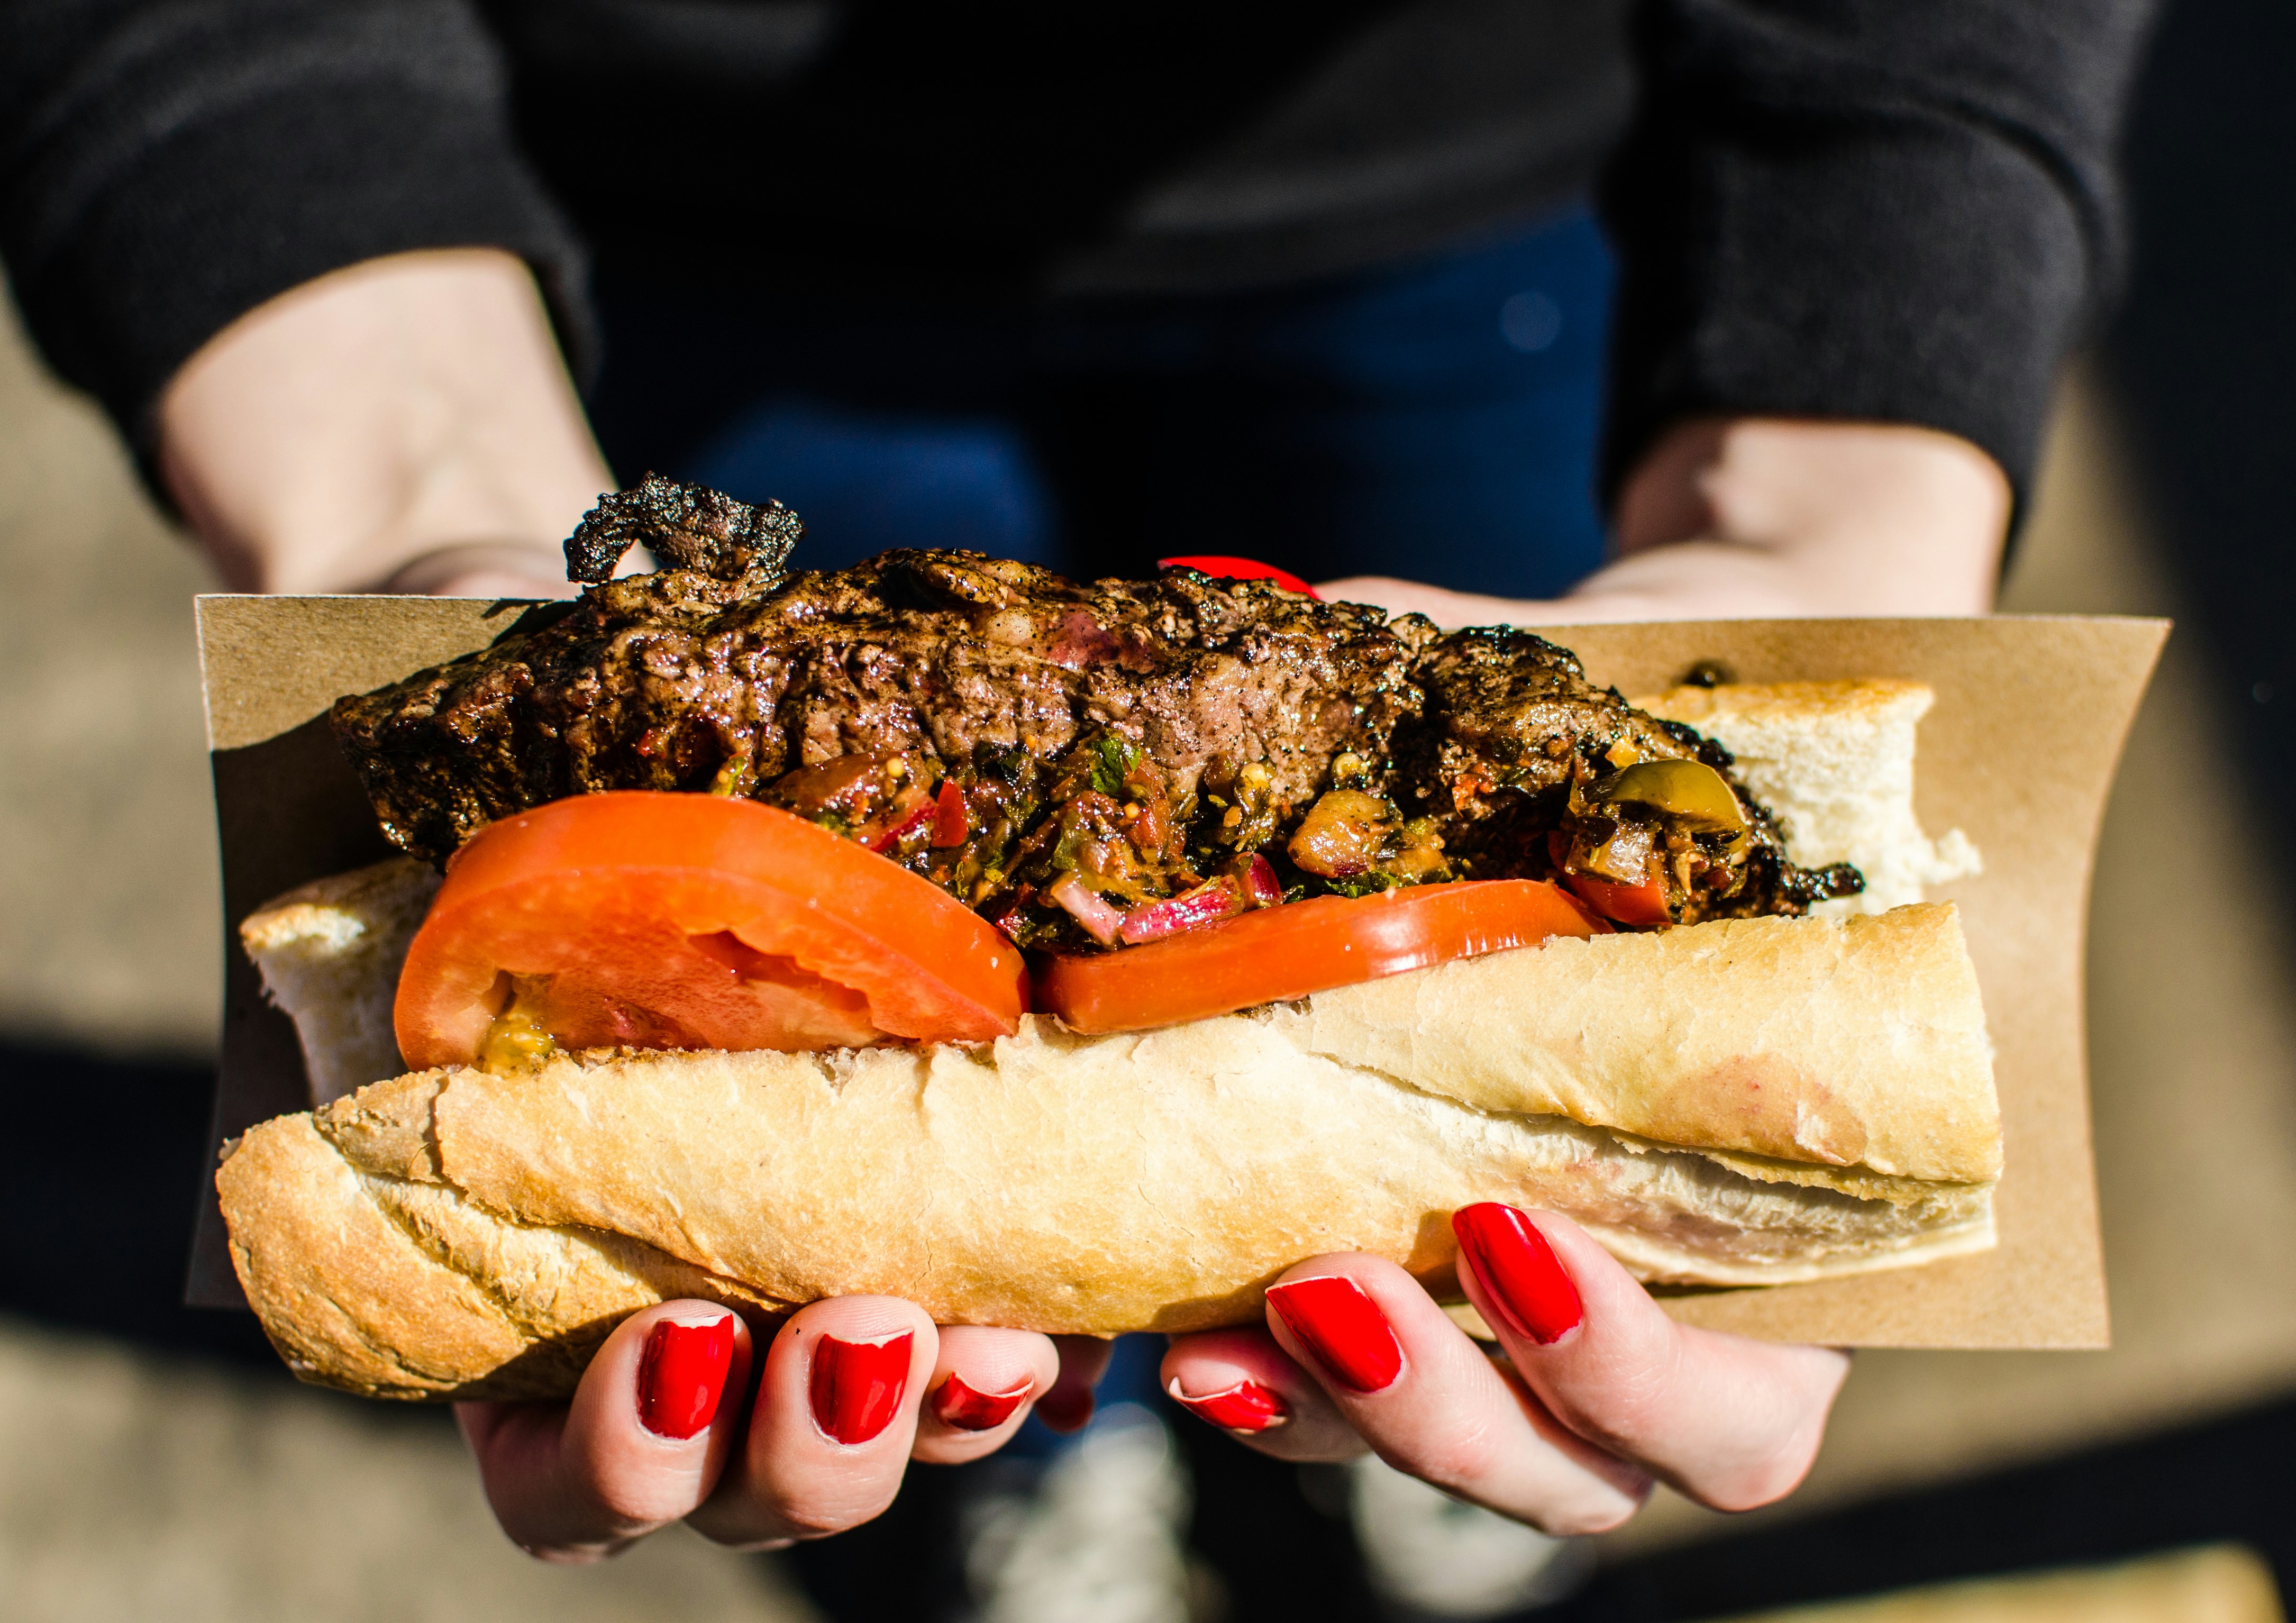 A woman with bright red nails holds a large steak sandwich. Two tomatoes are wedged on the side of the sandwich.